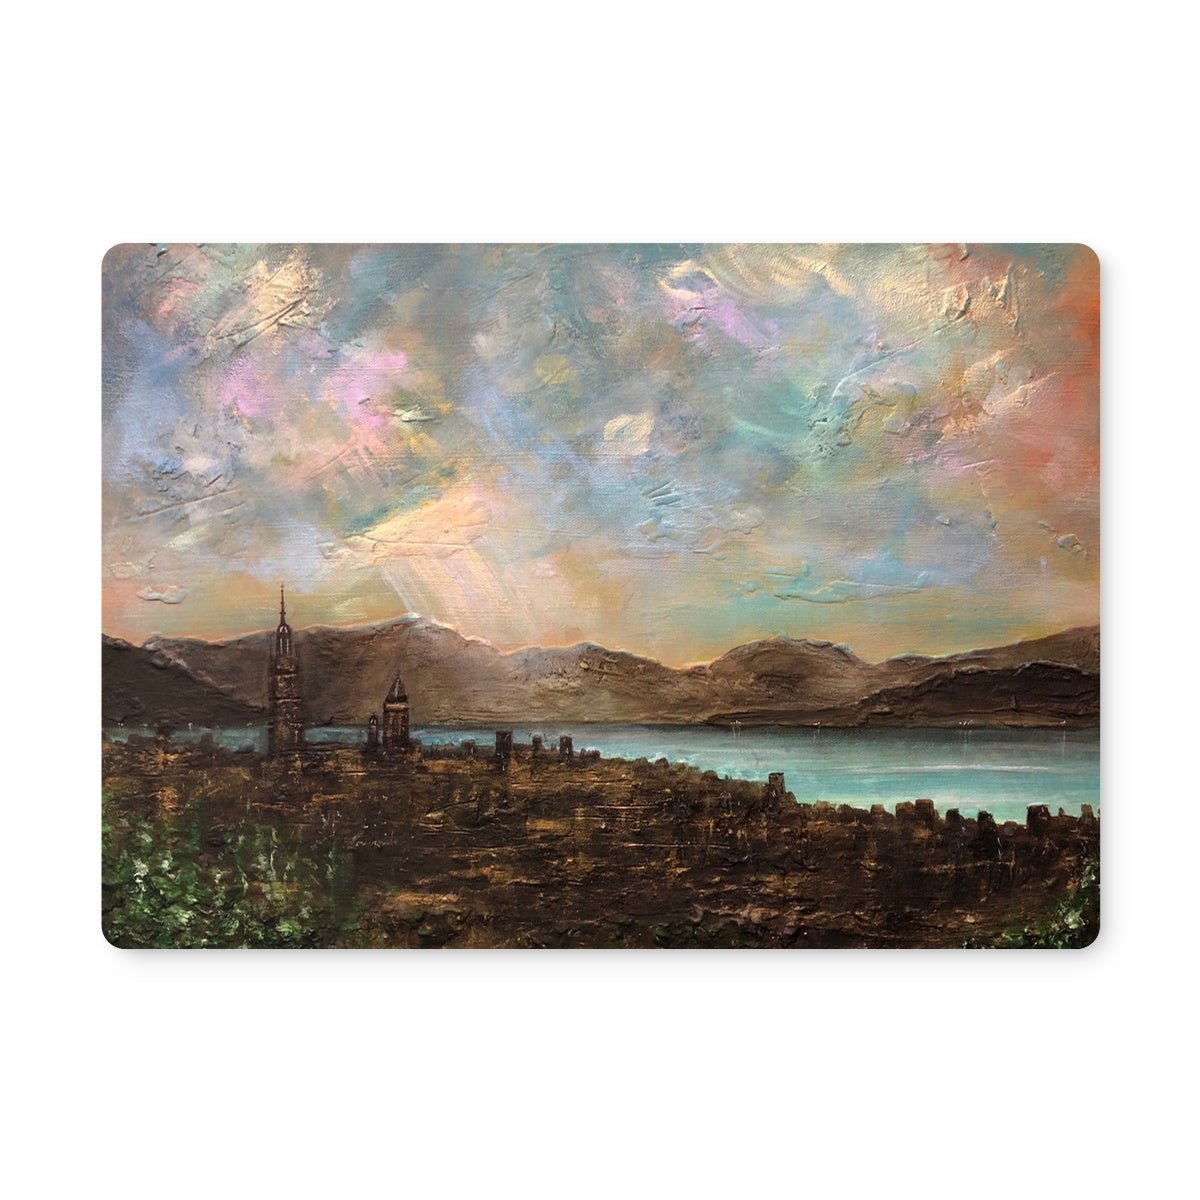 Angels Fingers Over Greenock Art Gifts Placemat-Placemats-River Clyde Art Gallery-Single Placemat-Paintings, Prints, Homeware, Art Gifts From Scotland By Scottish Artist Kevin Hunter